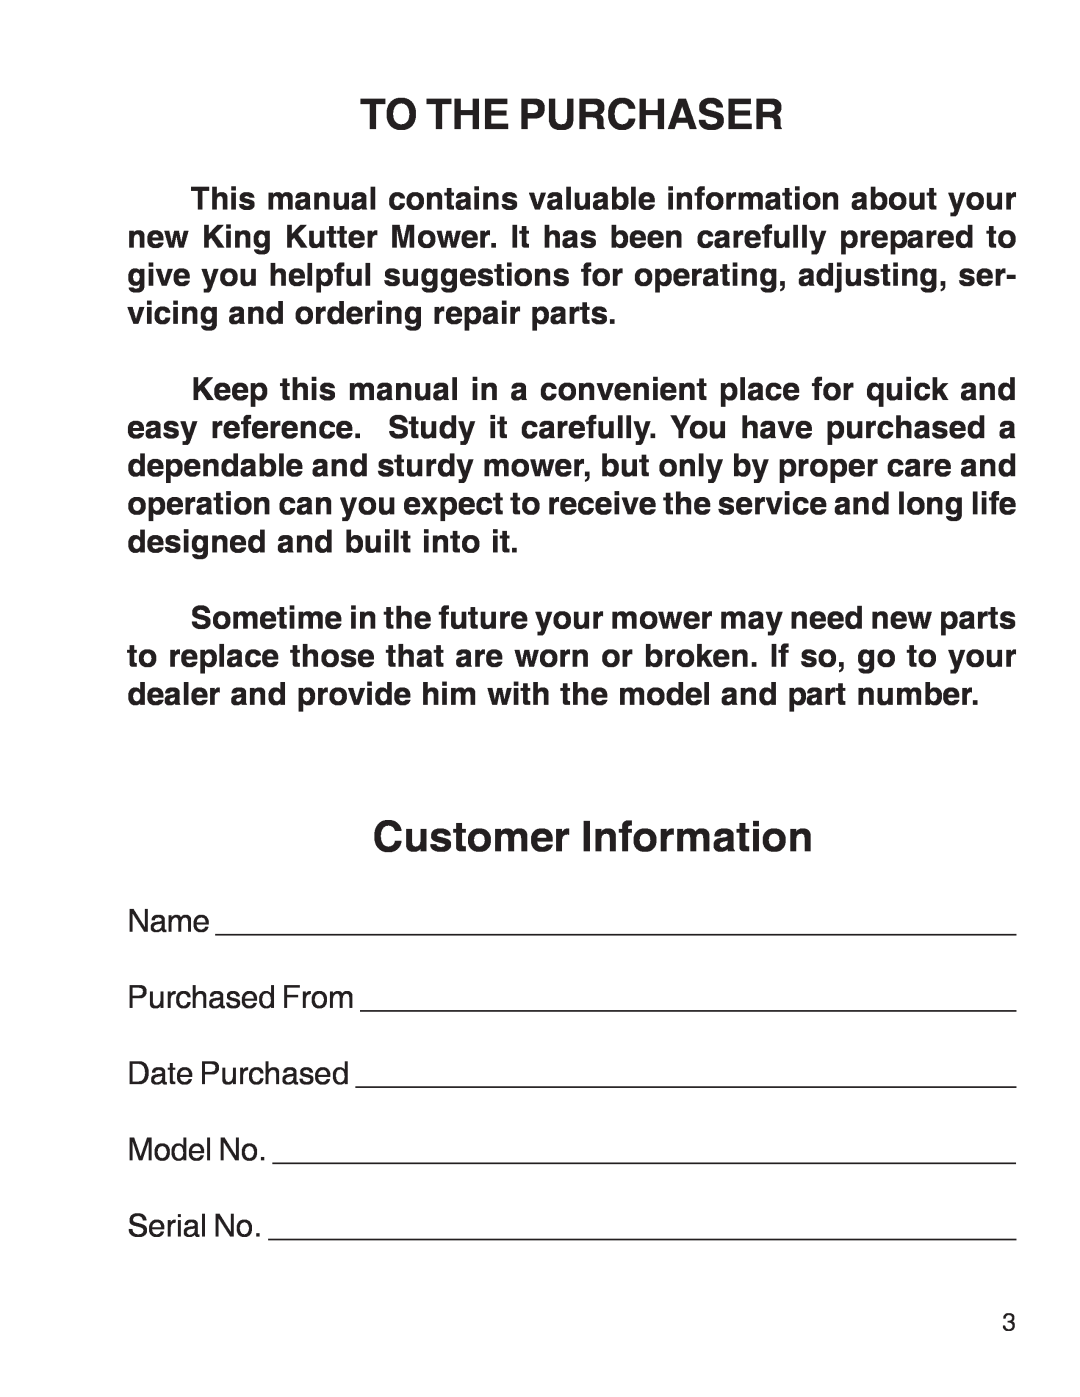 King Kutter Free Floating manual To The Purchaser, Customer Information 